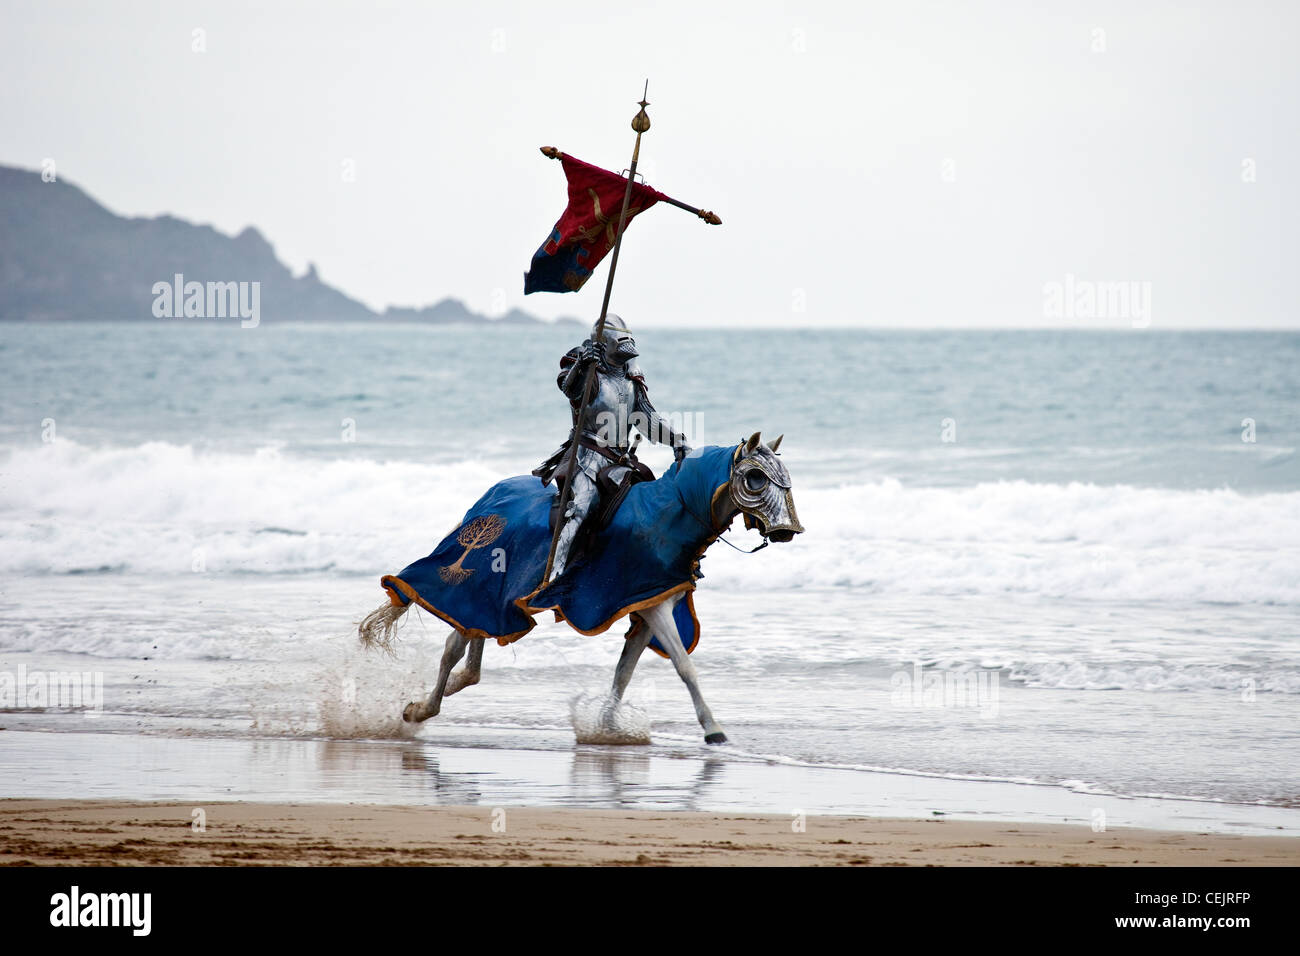 Filming a scene from Snow White And The Huntsman released in June 2012 on Marloes Beach Pembrokeshire. Stock Photo